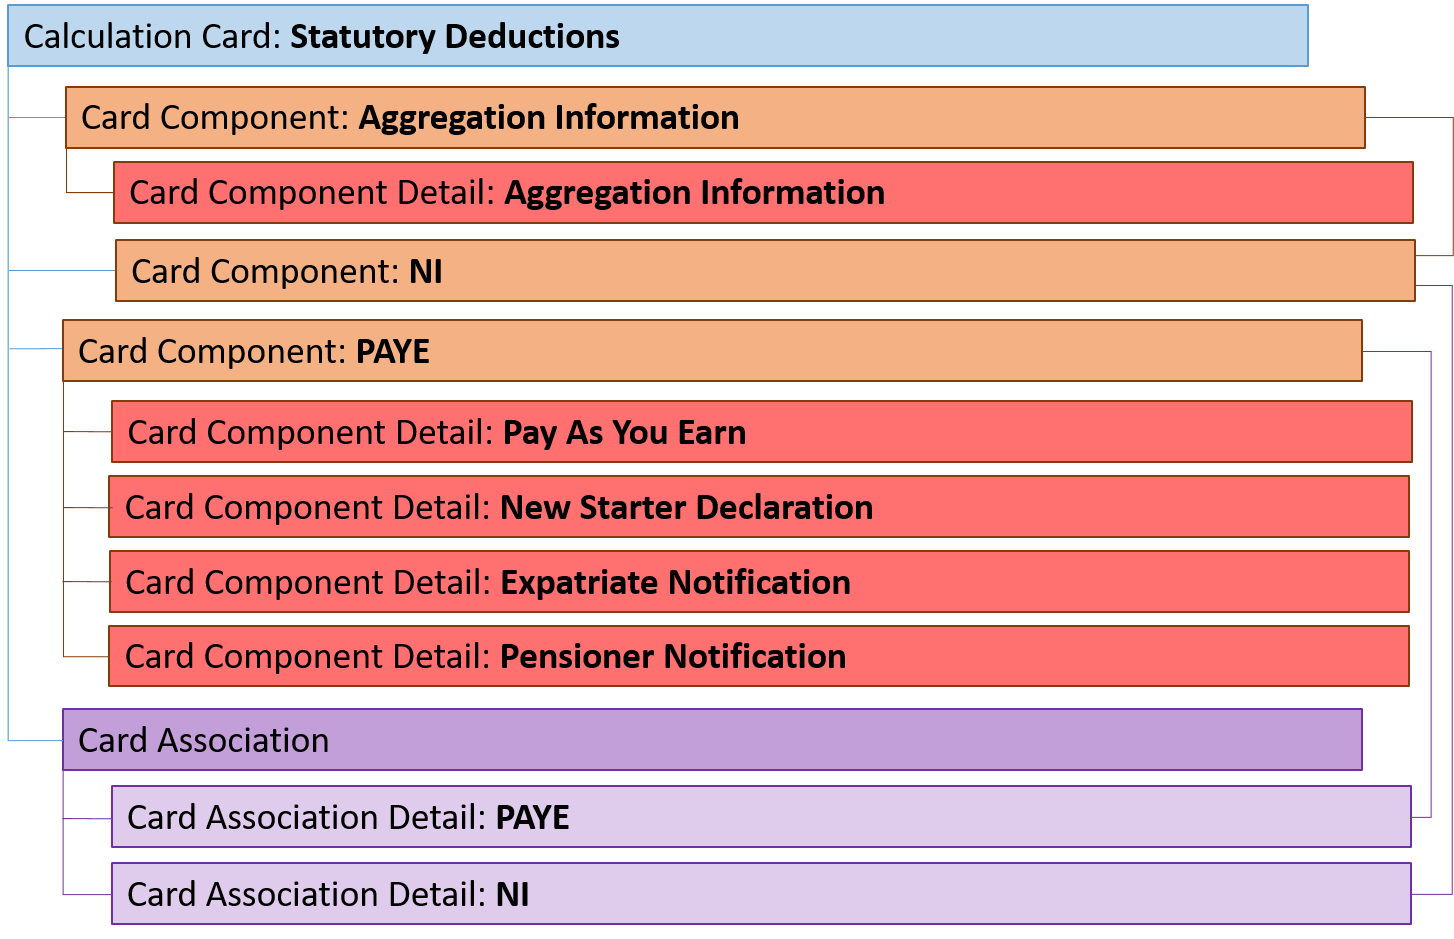 uk- statutory deductions card hierarchy